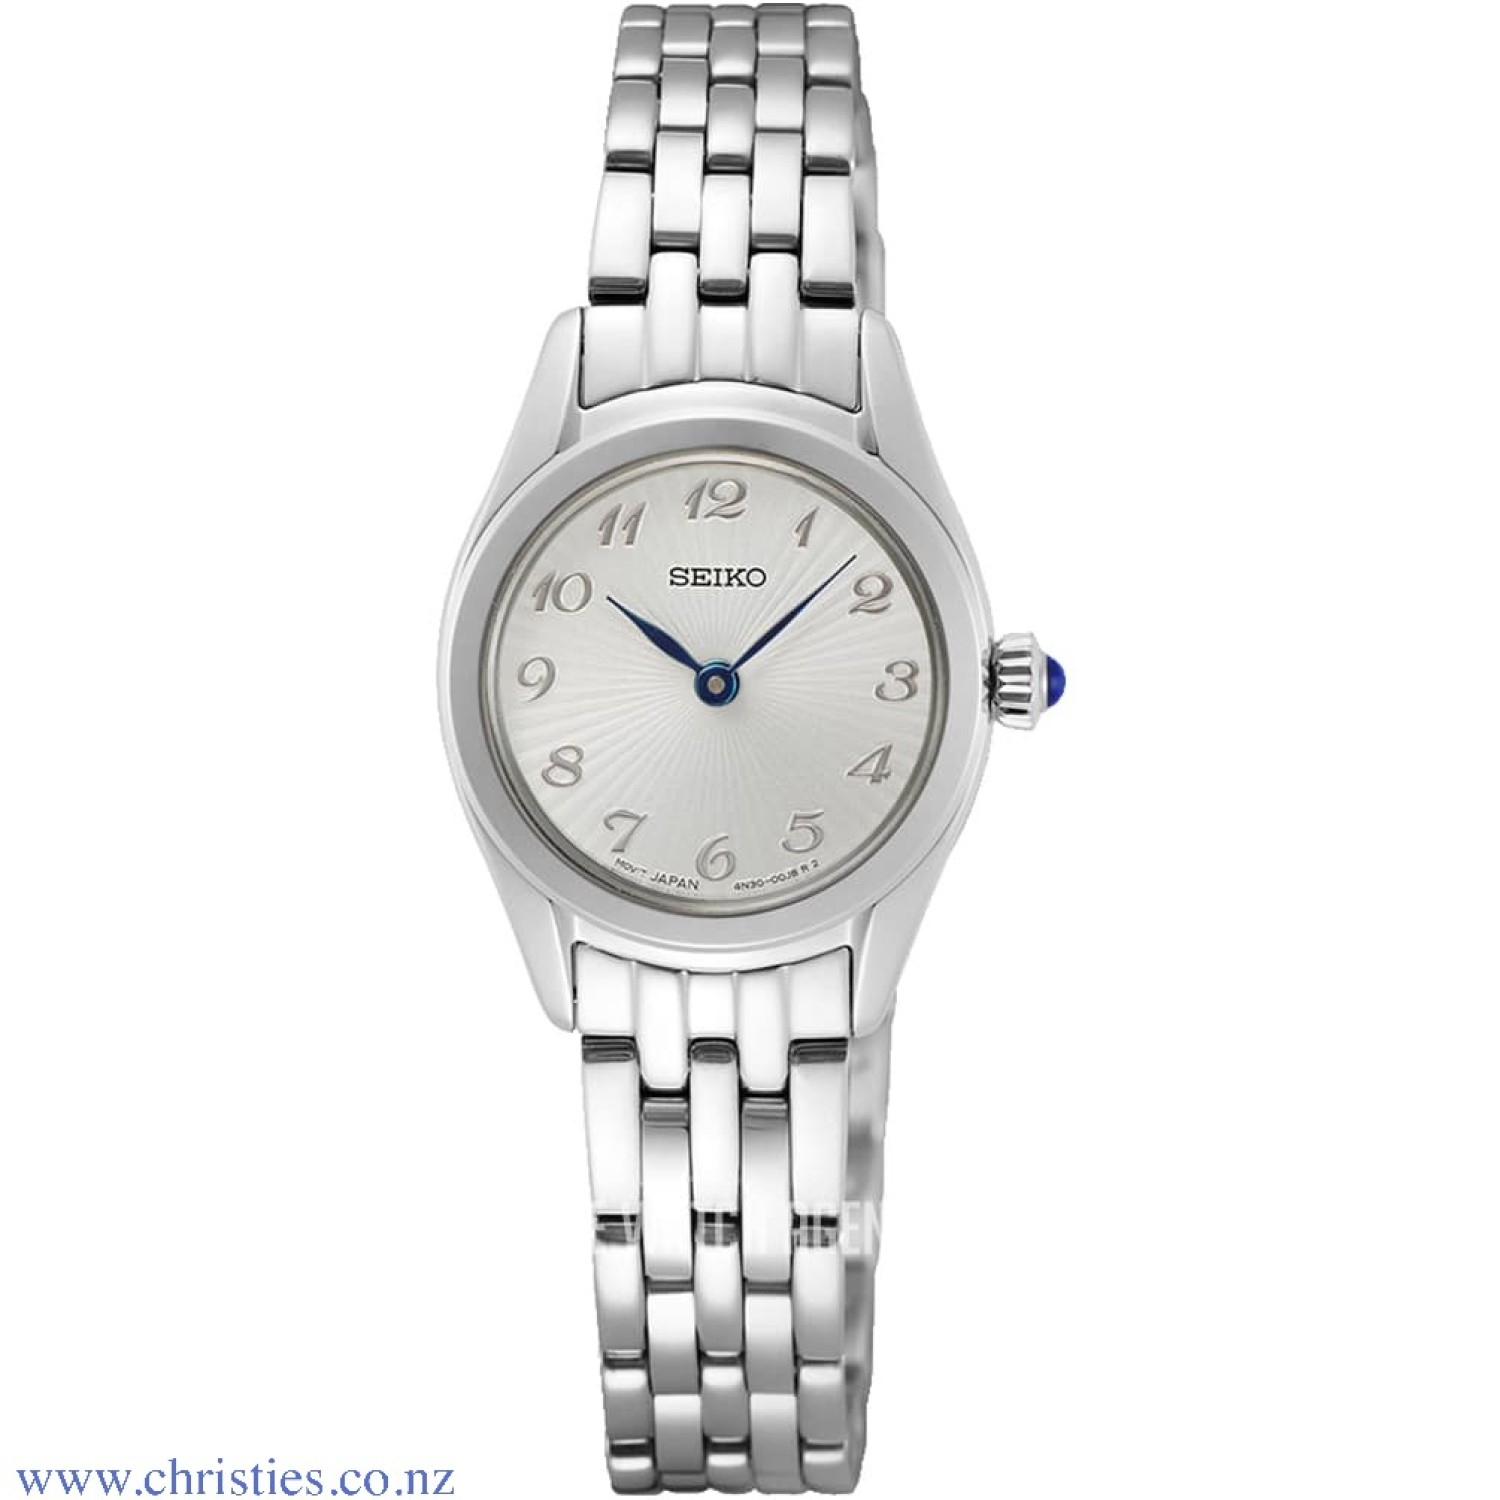 SWR057P Seiko Ladies Quartz Watch. Using the Seiko Quartz 8T67 movement, the Seiko chronograph SSB267P1 features in full stainless steel with Hardlex glass and a case size of 44.9mm and thickness of 12.1mm. This watch has a water resistance rating of 10 G